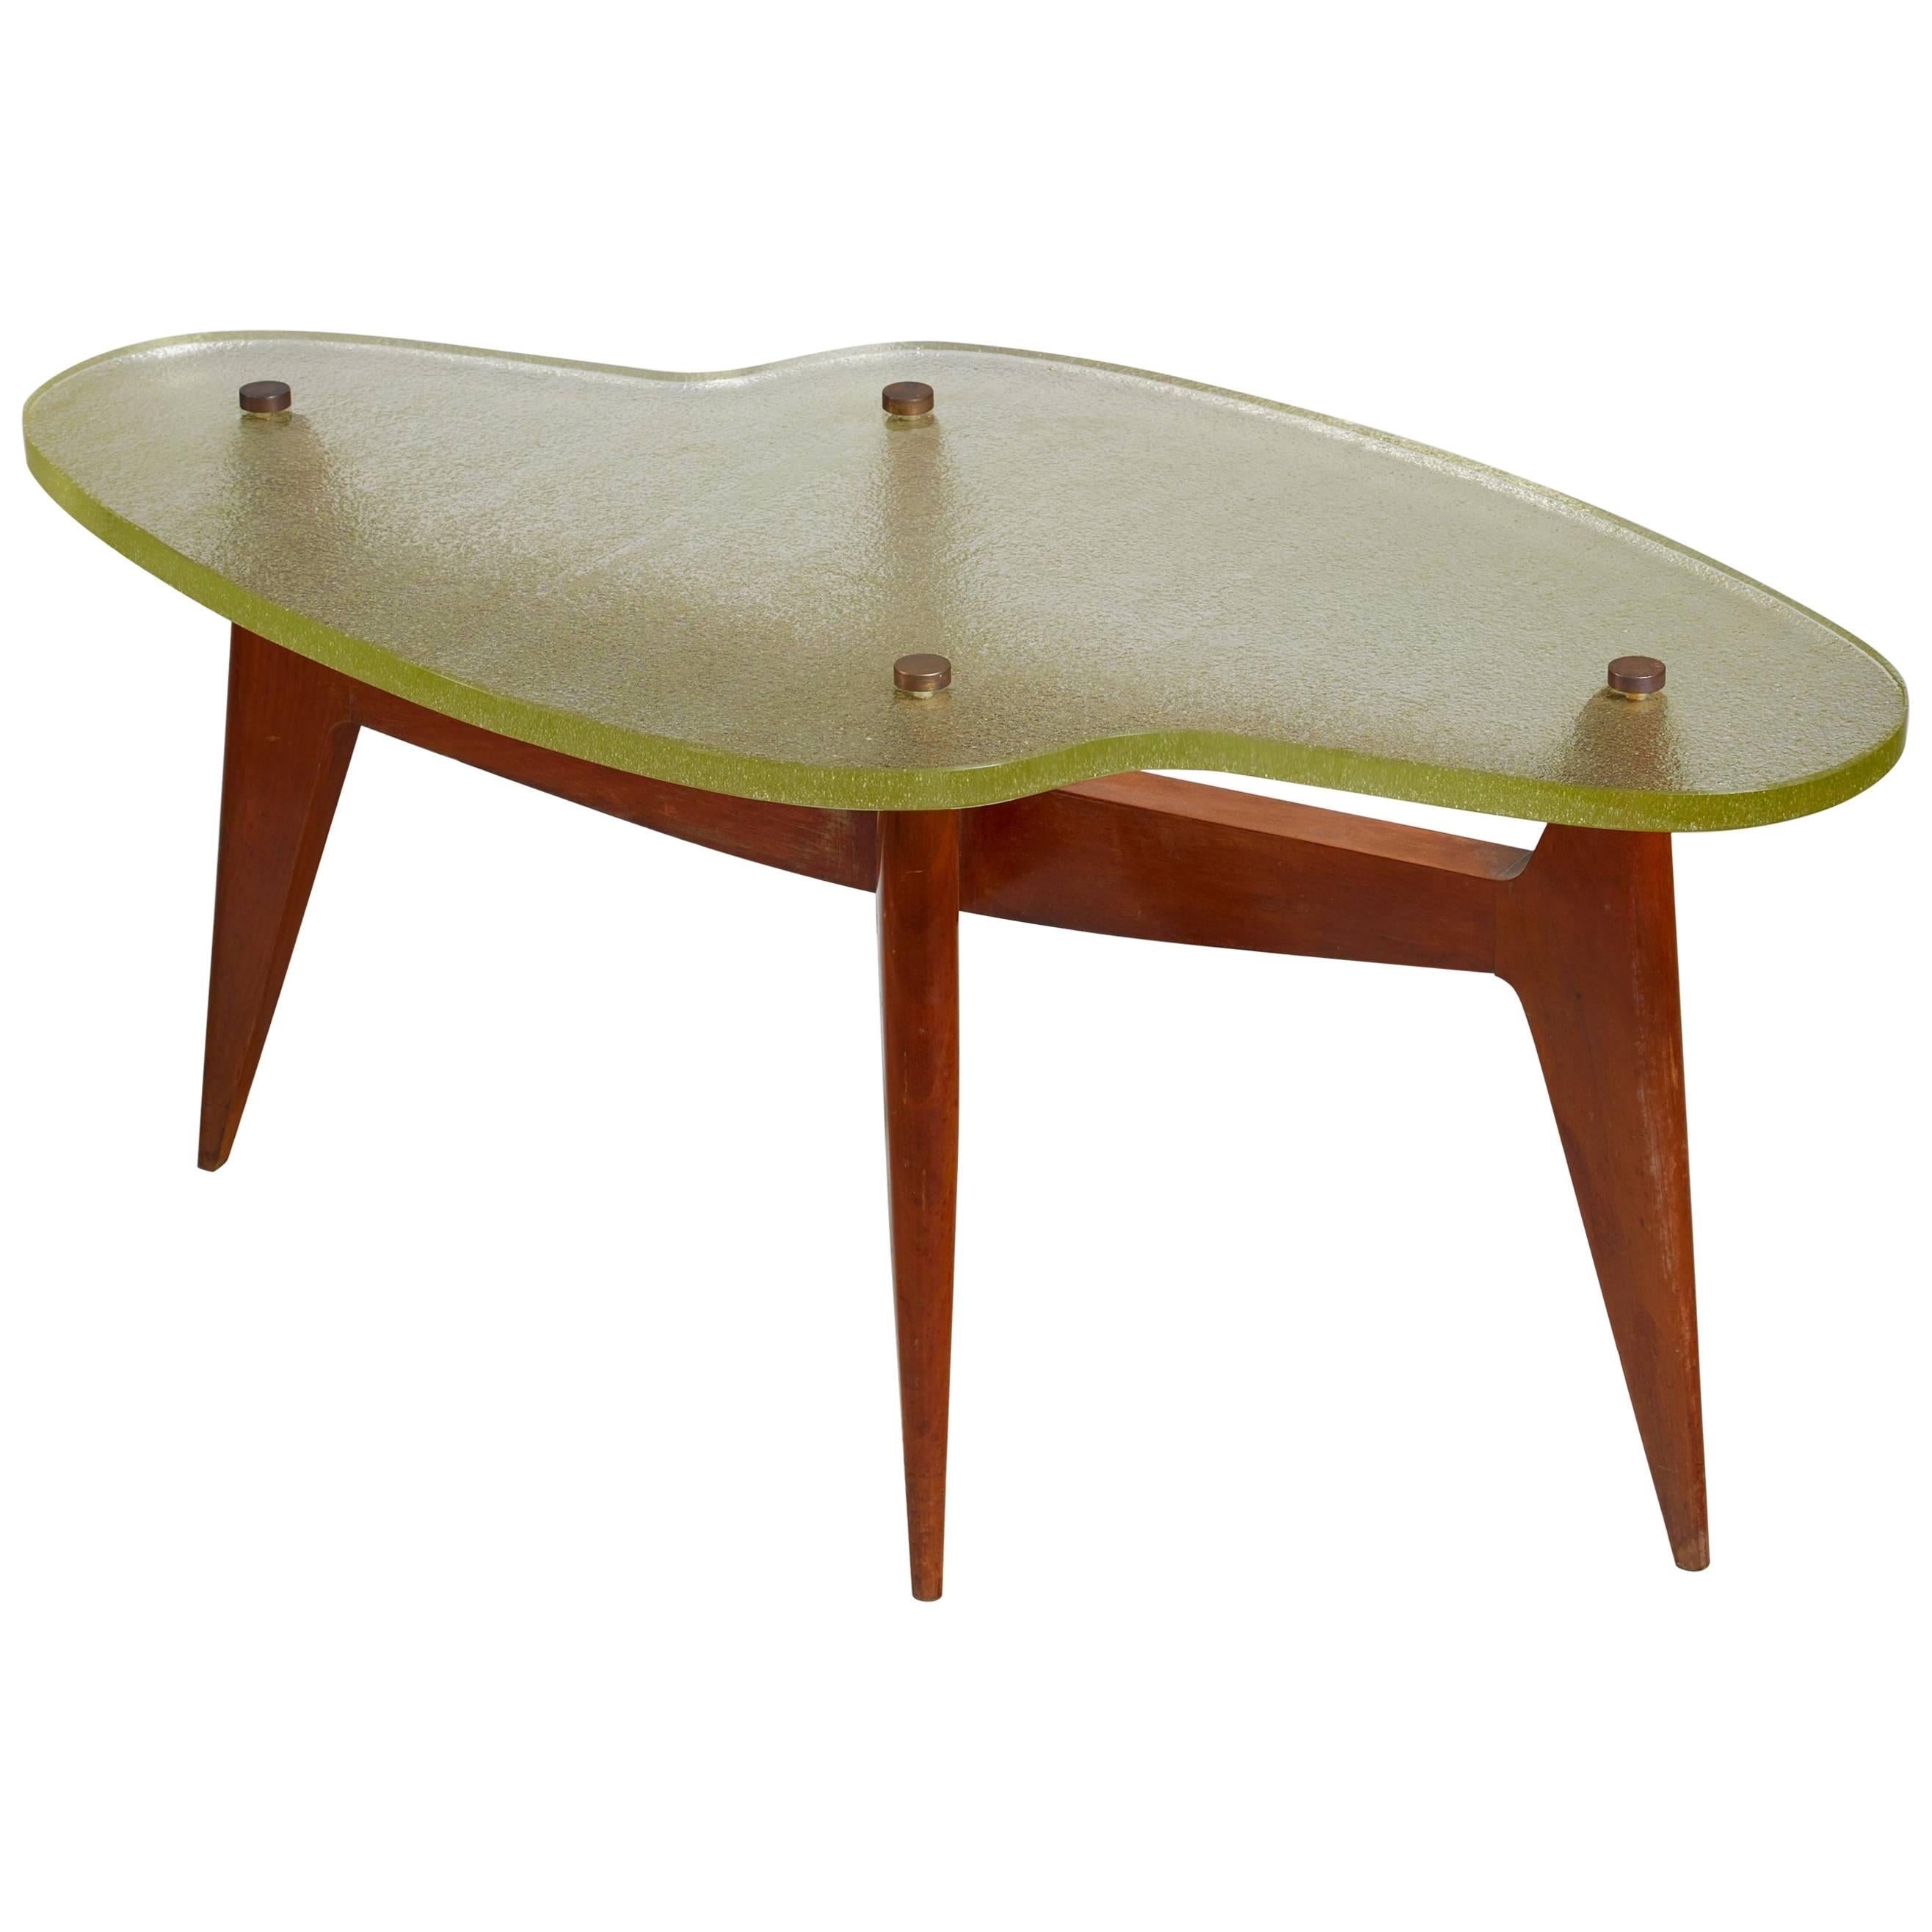 French Free-Form Coffee or Side Table with Glass Top, 1950s